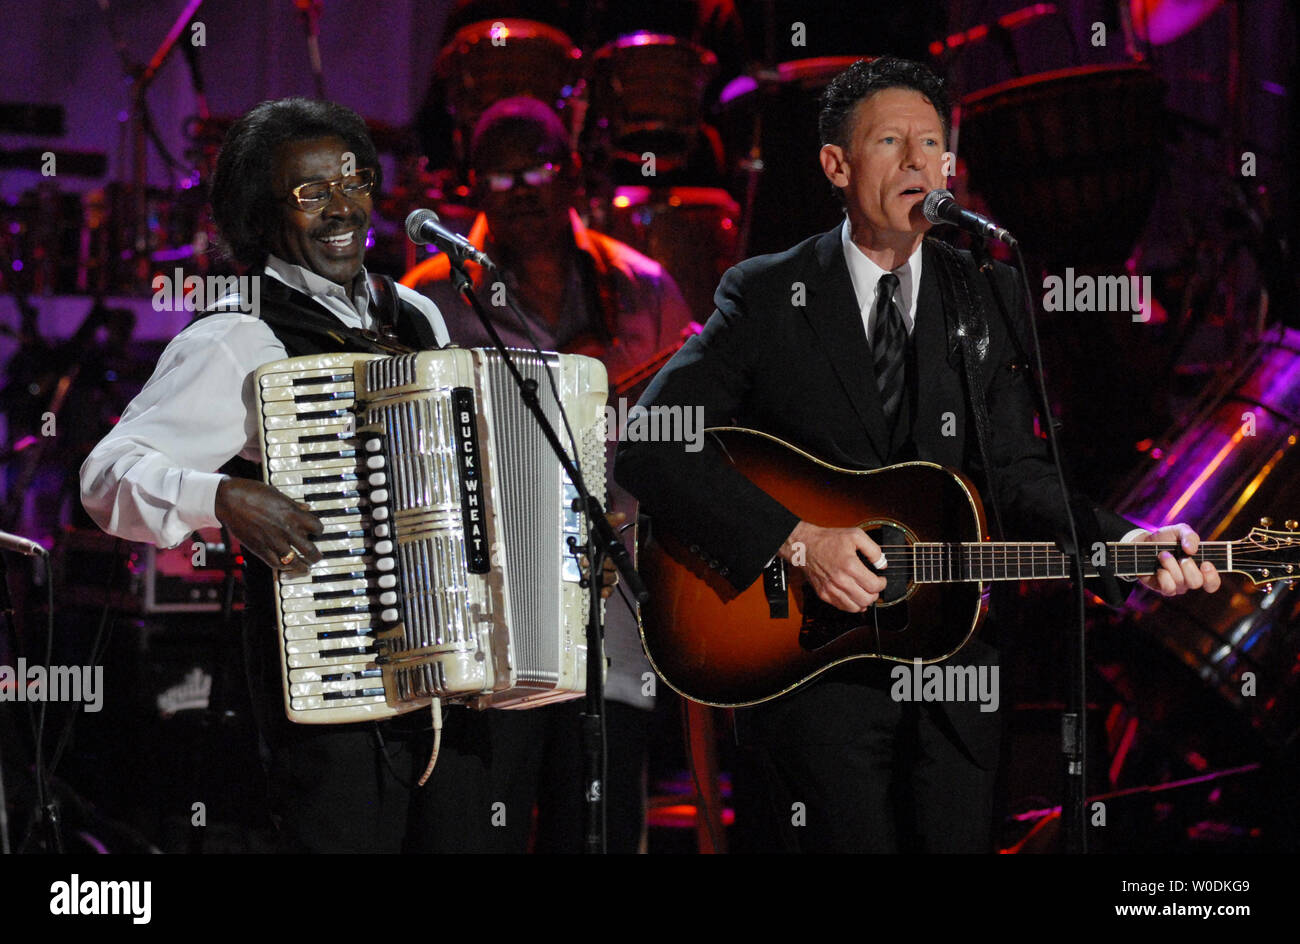 Lyle Lovett (R) performs with Buckwheat Zydeco during a concert celebrating  the music of Paul Simon, recipient of the first Library of Congress Gershwin Prize for Popular Song, at the Warner Theater in Washington on May 23, 2007.  (UPI Photo/Alexis C. Glenn) Stock Photo